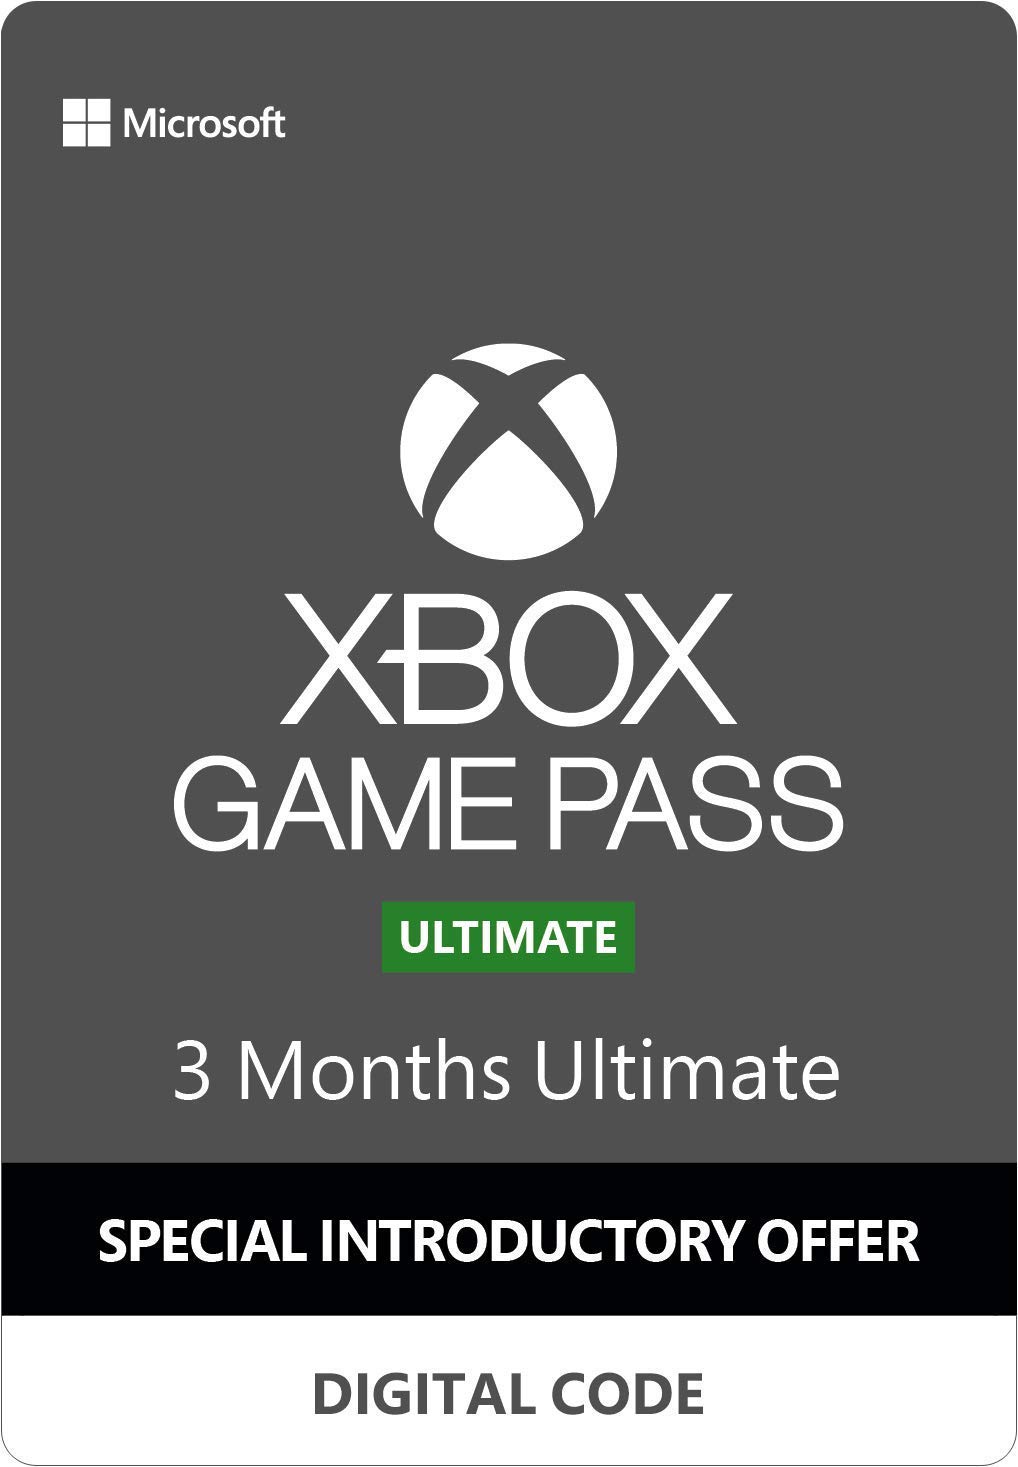 xbox one ultimate game pass $1